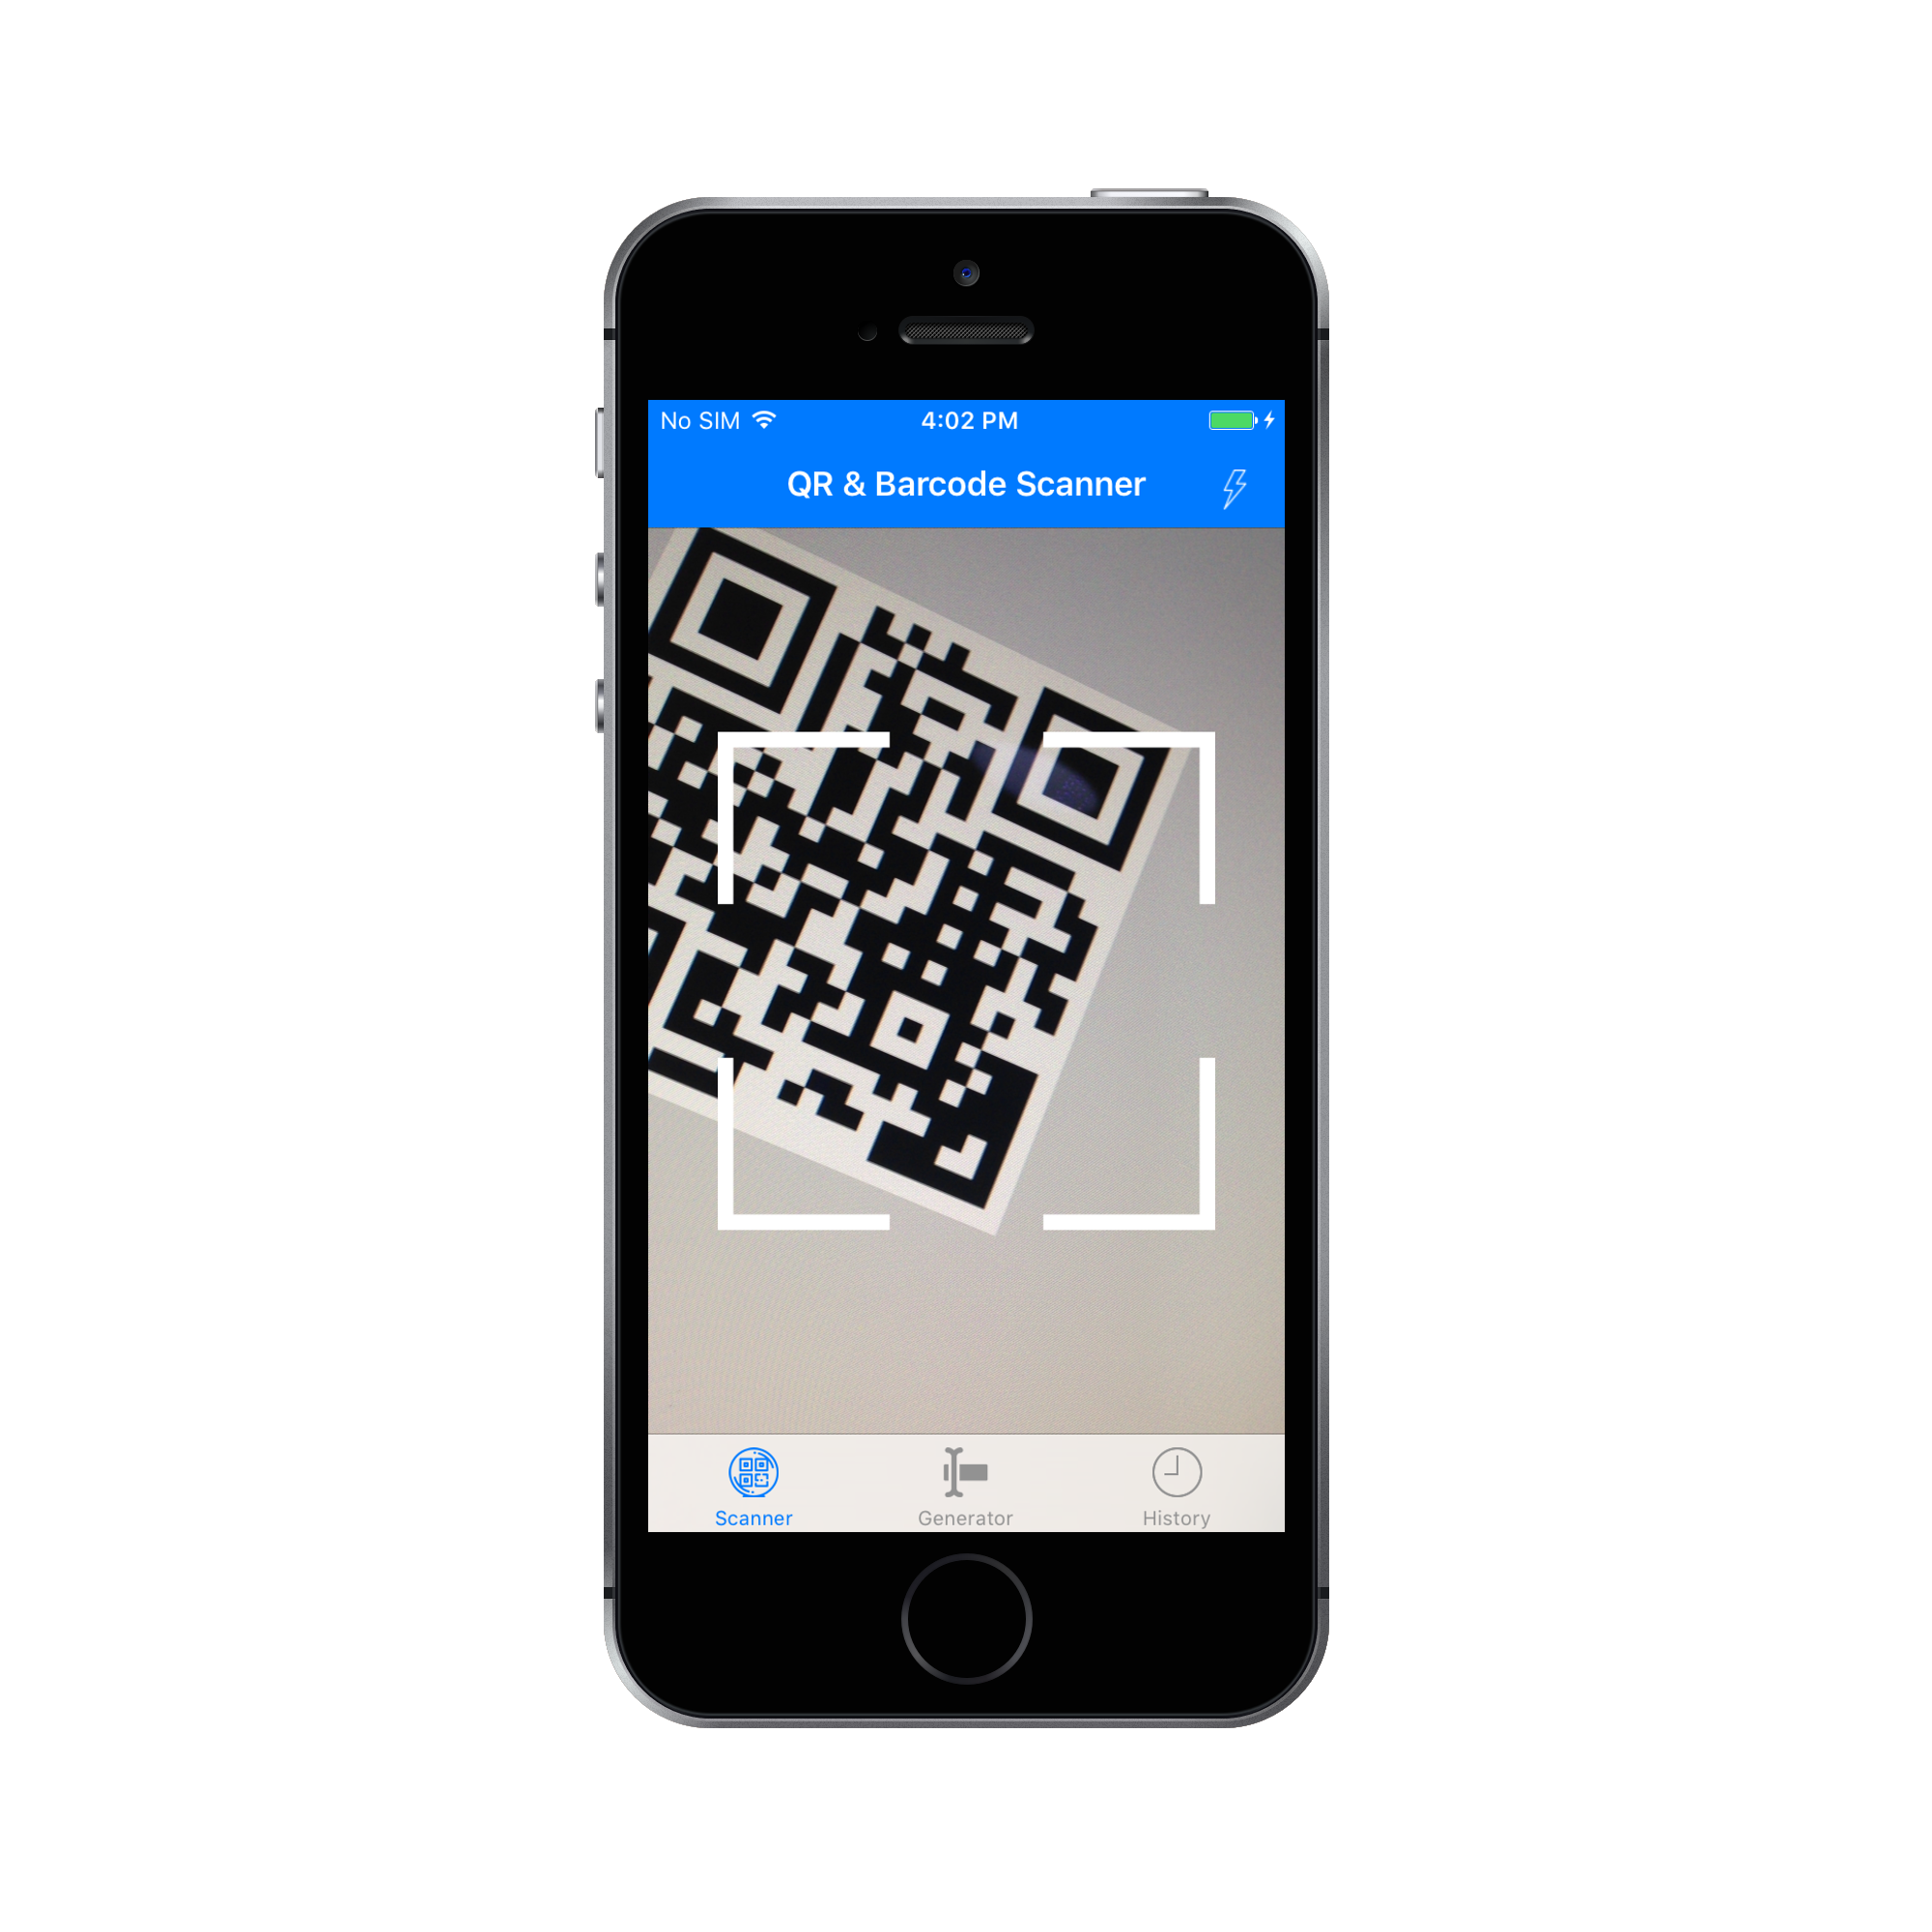 does mapmyfitness app have qr code reader